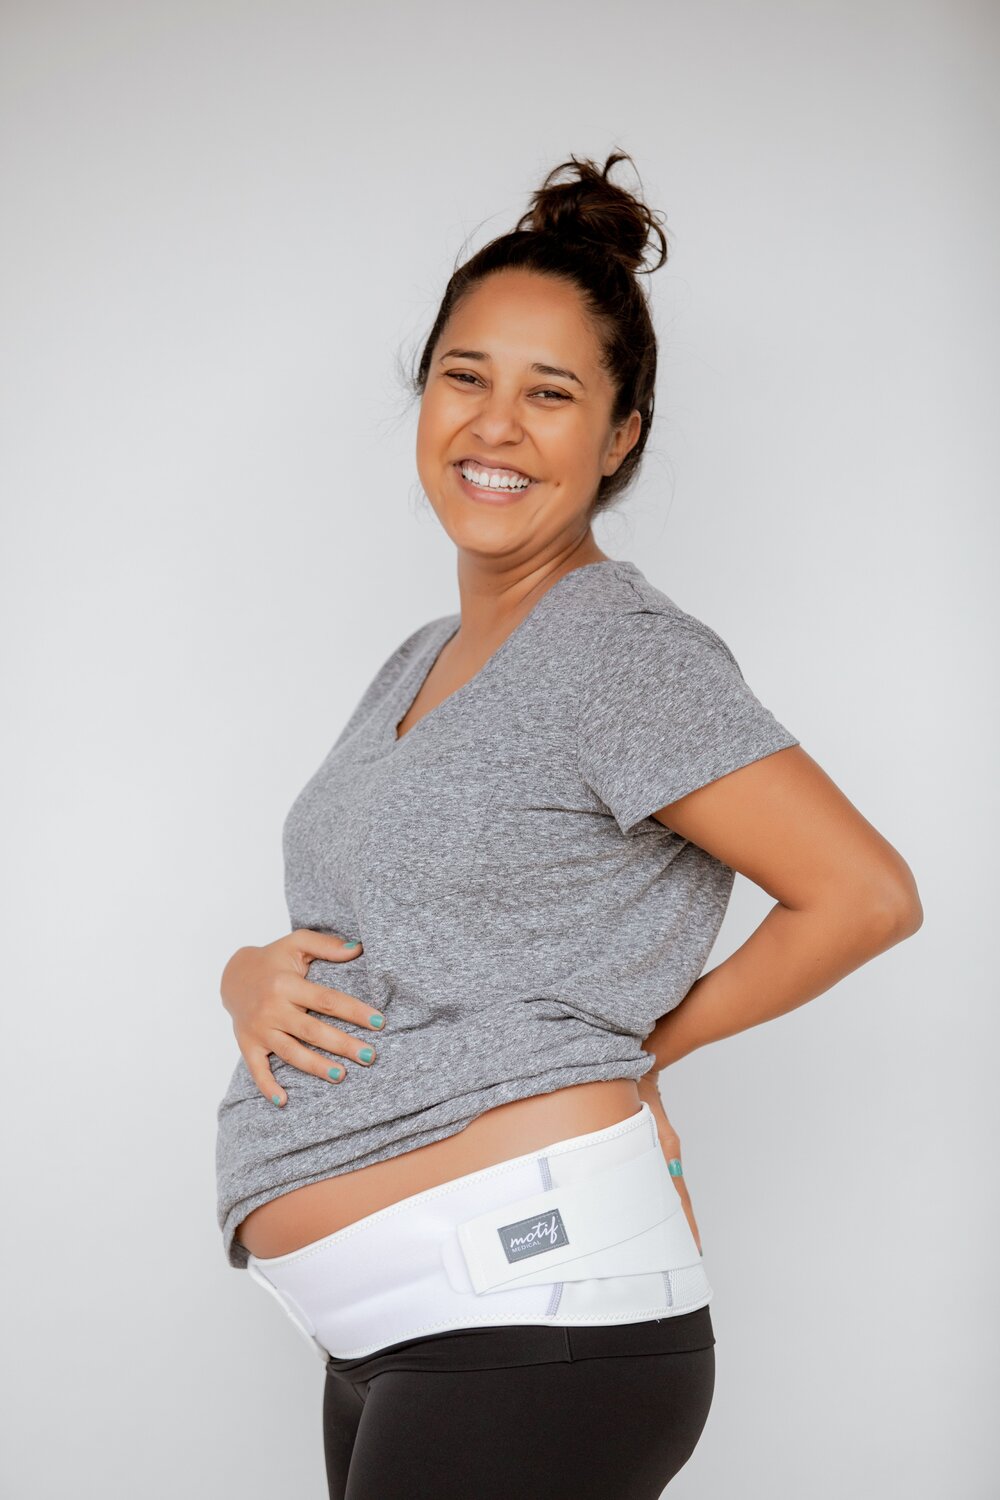 Pregnancy Support Band by Motif — PMSI